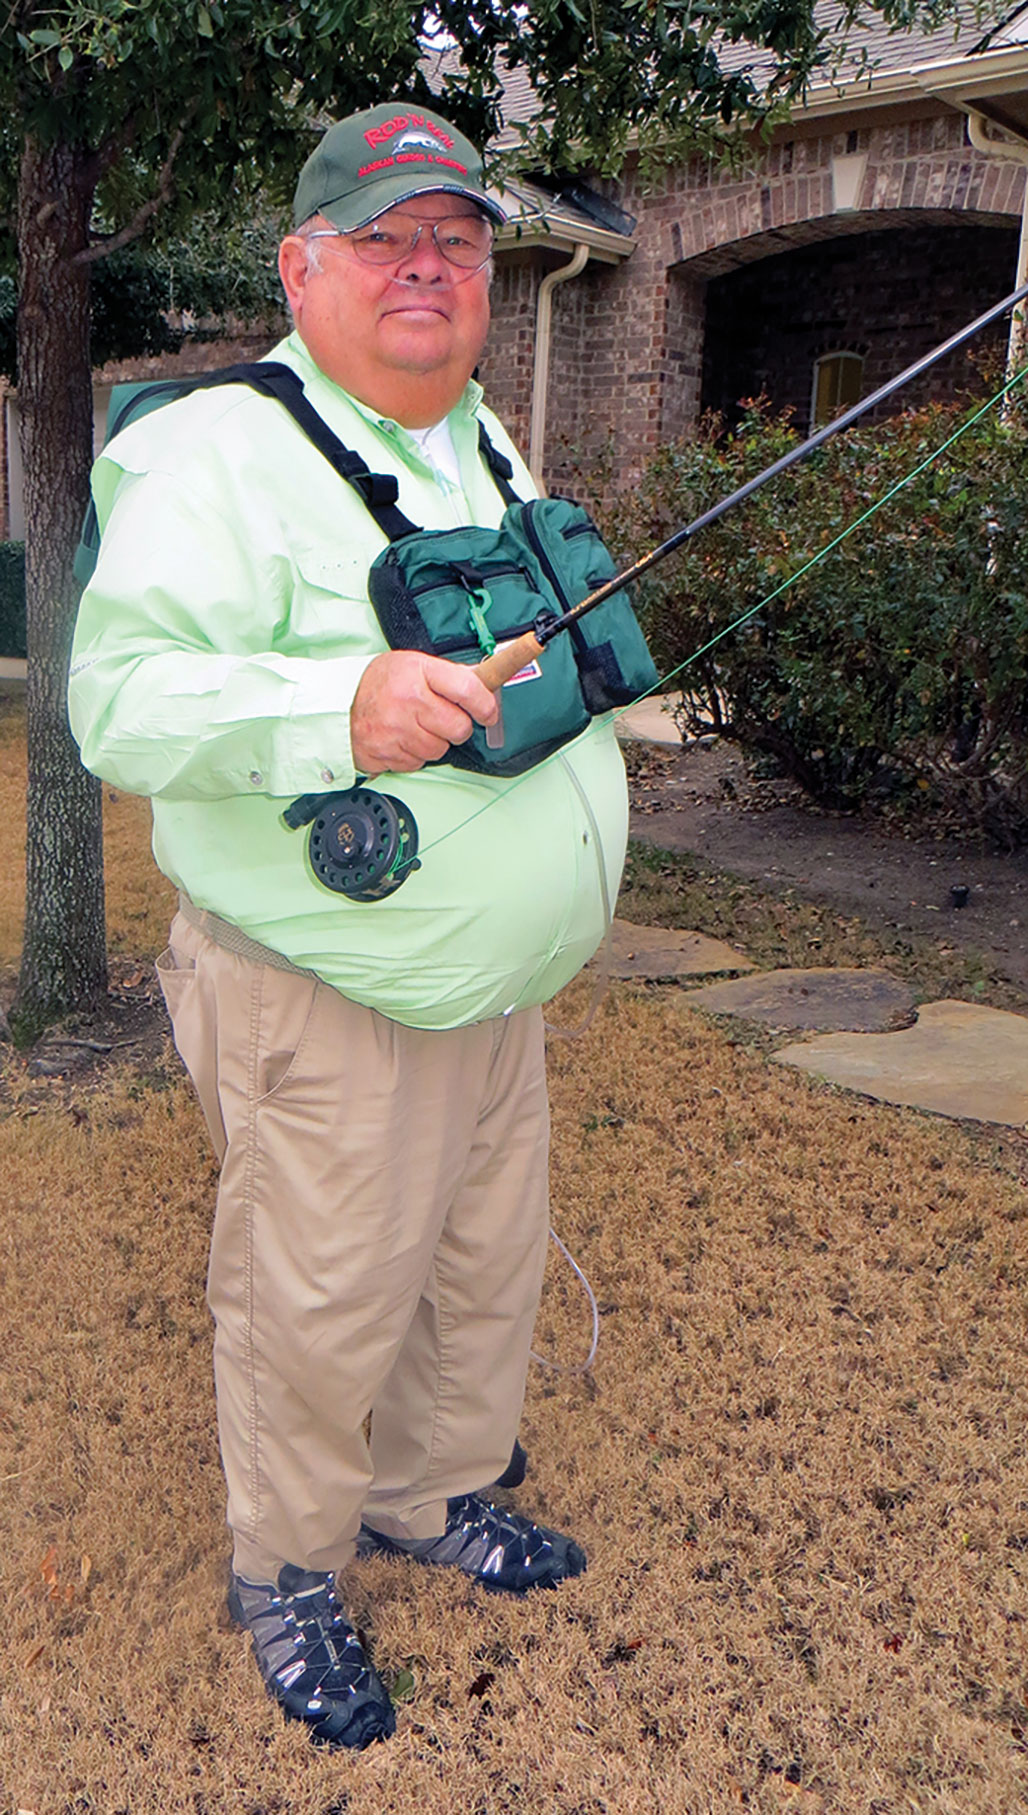 Dick Farnsworth with his fly fishing rod, reel and gear. – Robson